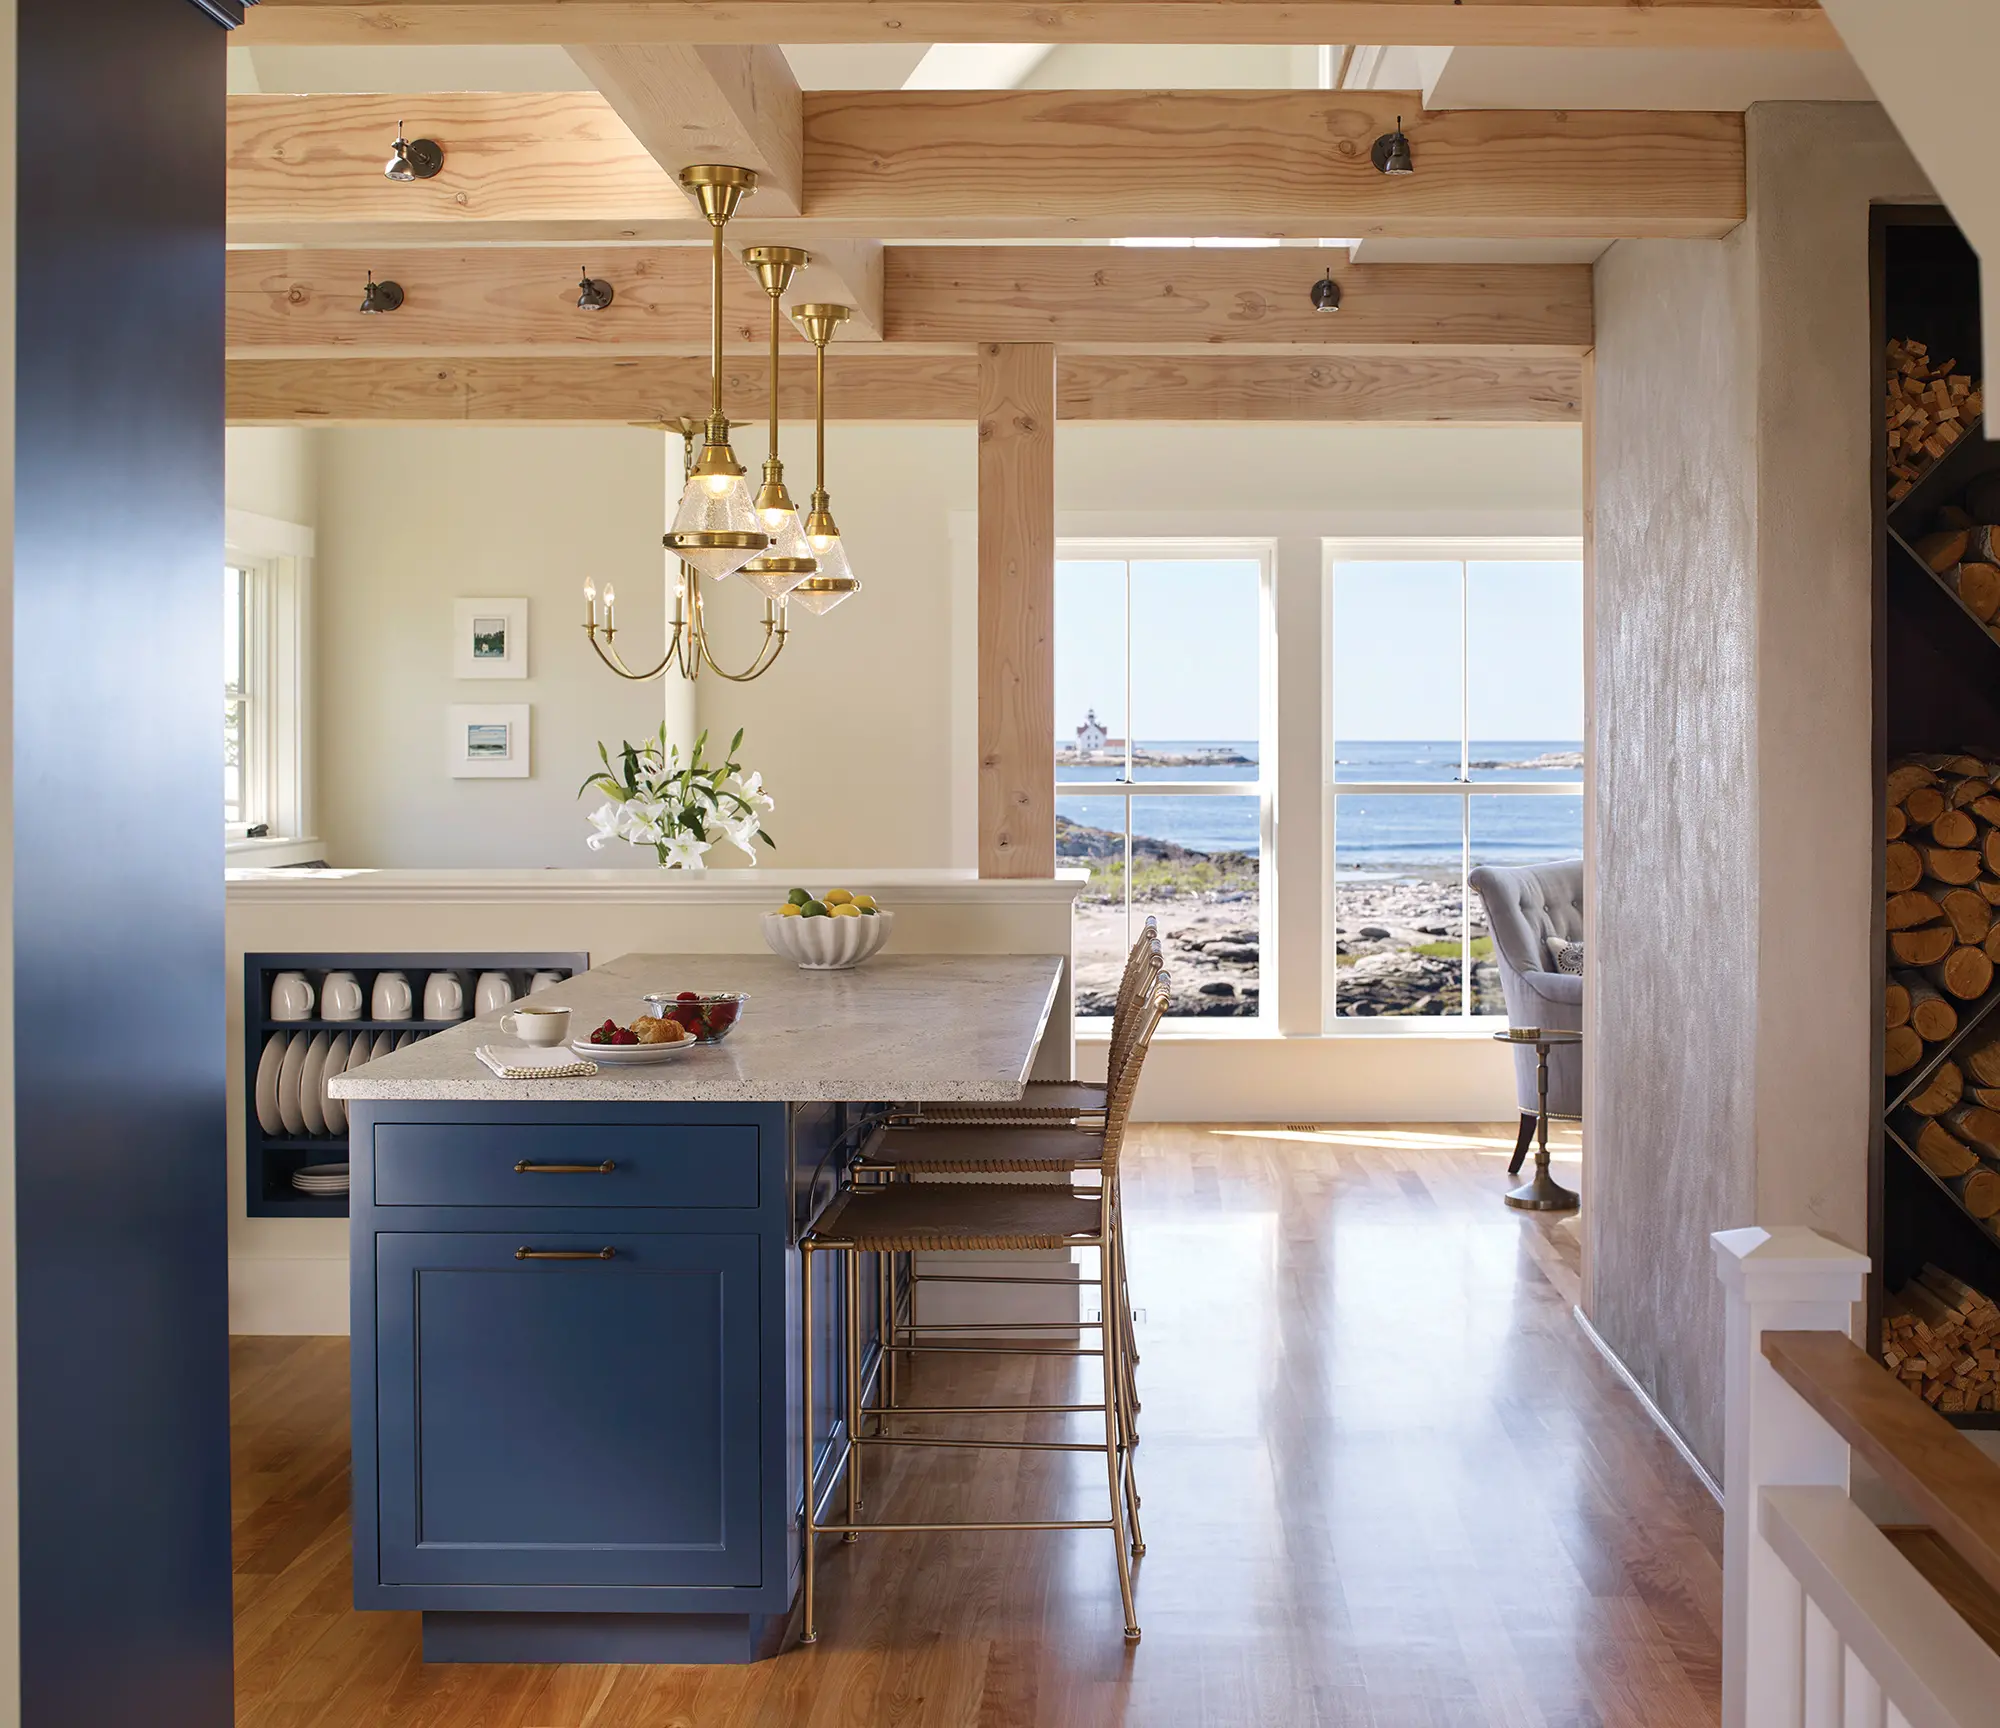 View of kitchen with exposed beams and view of ocean